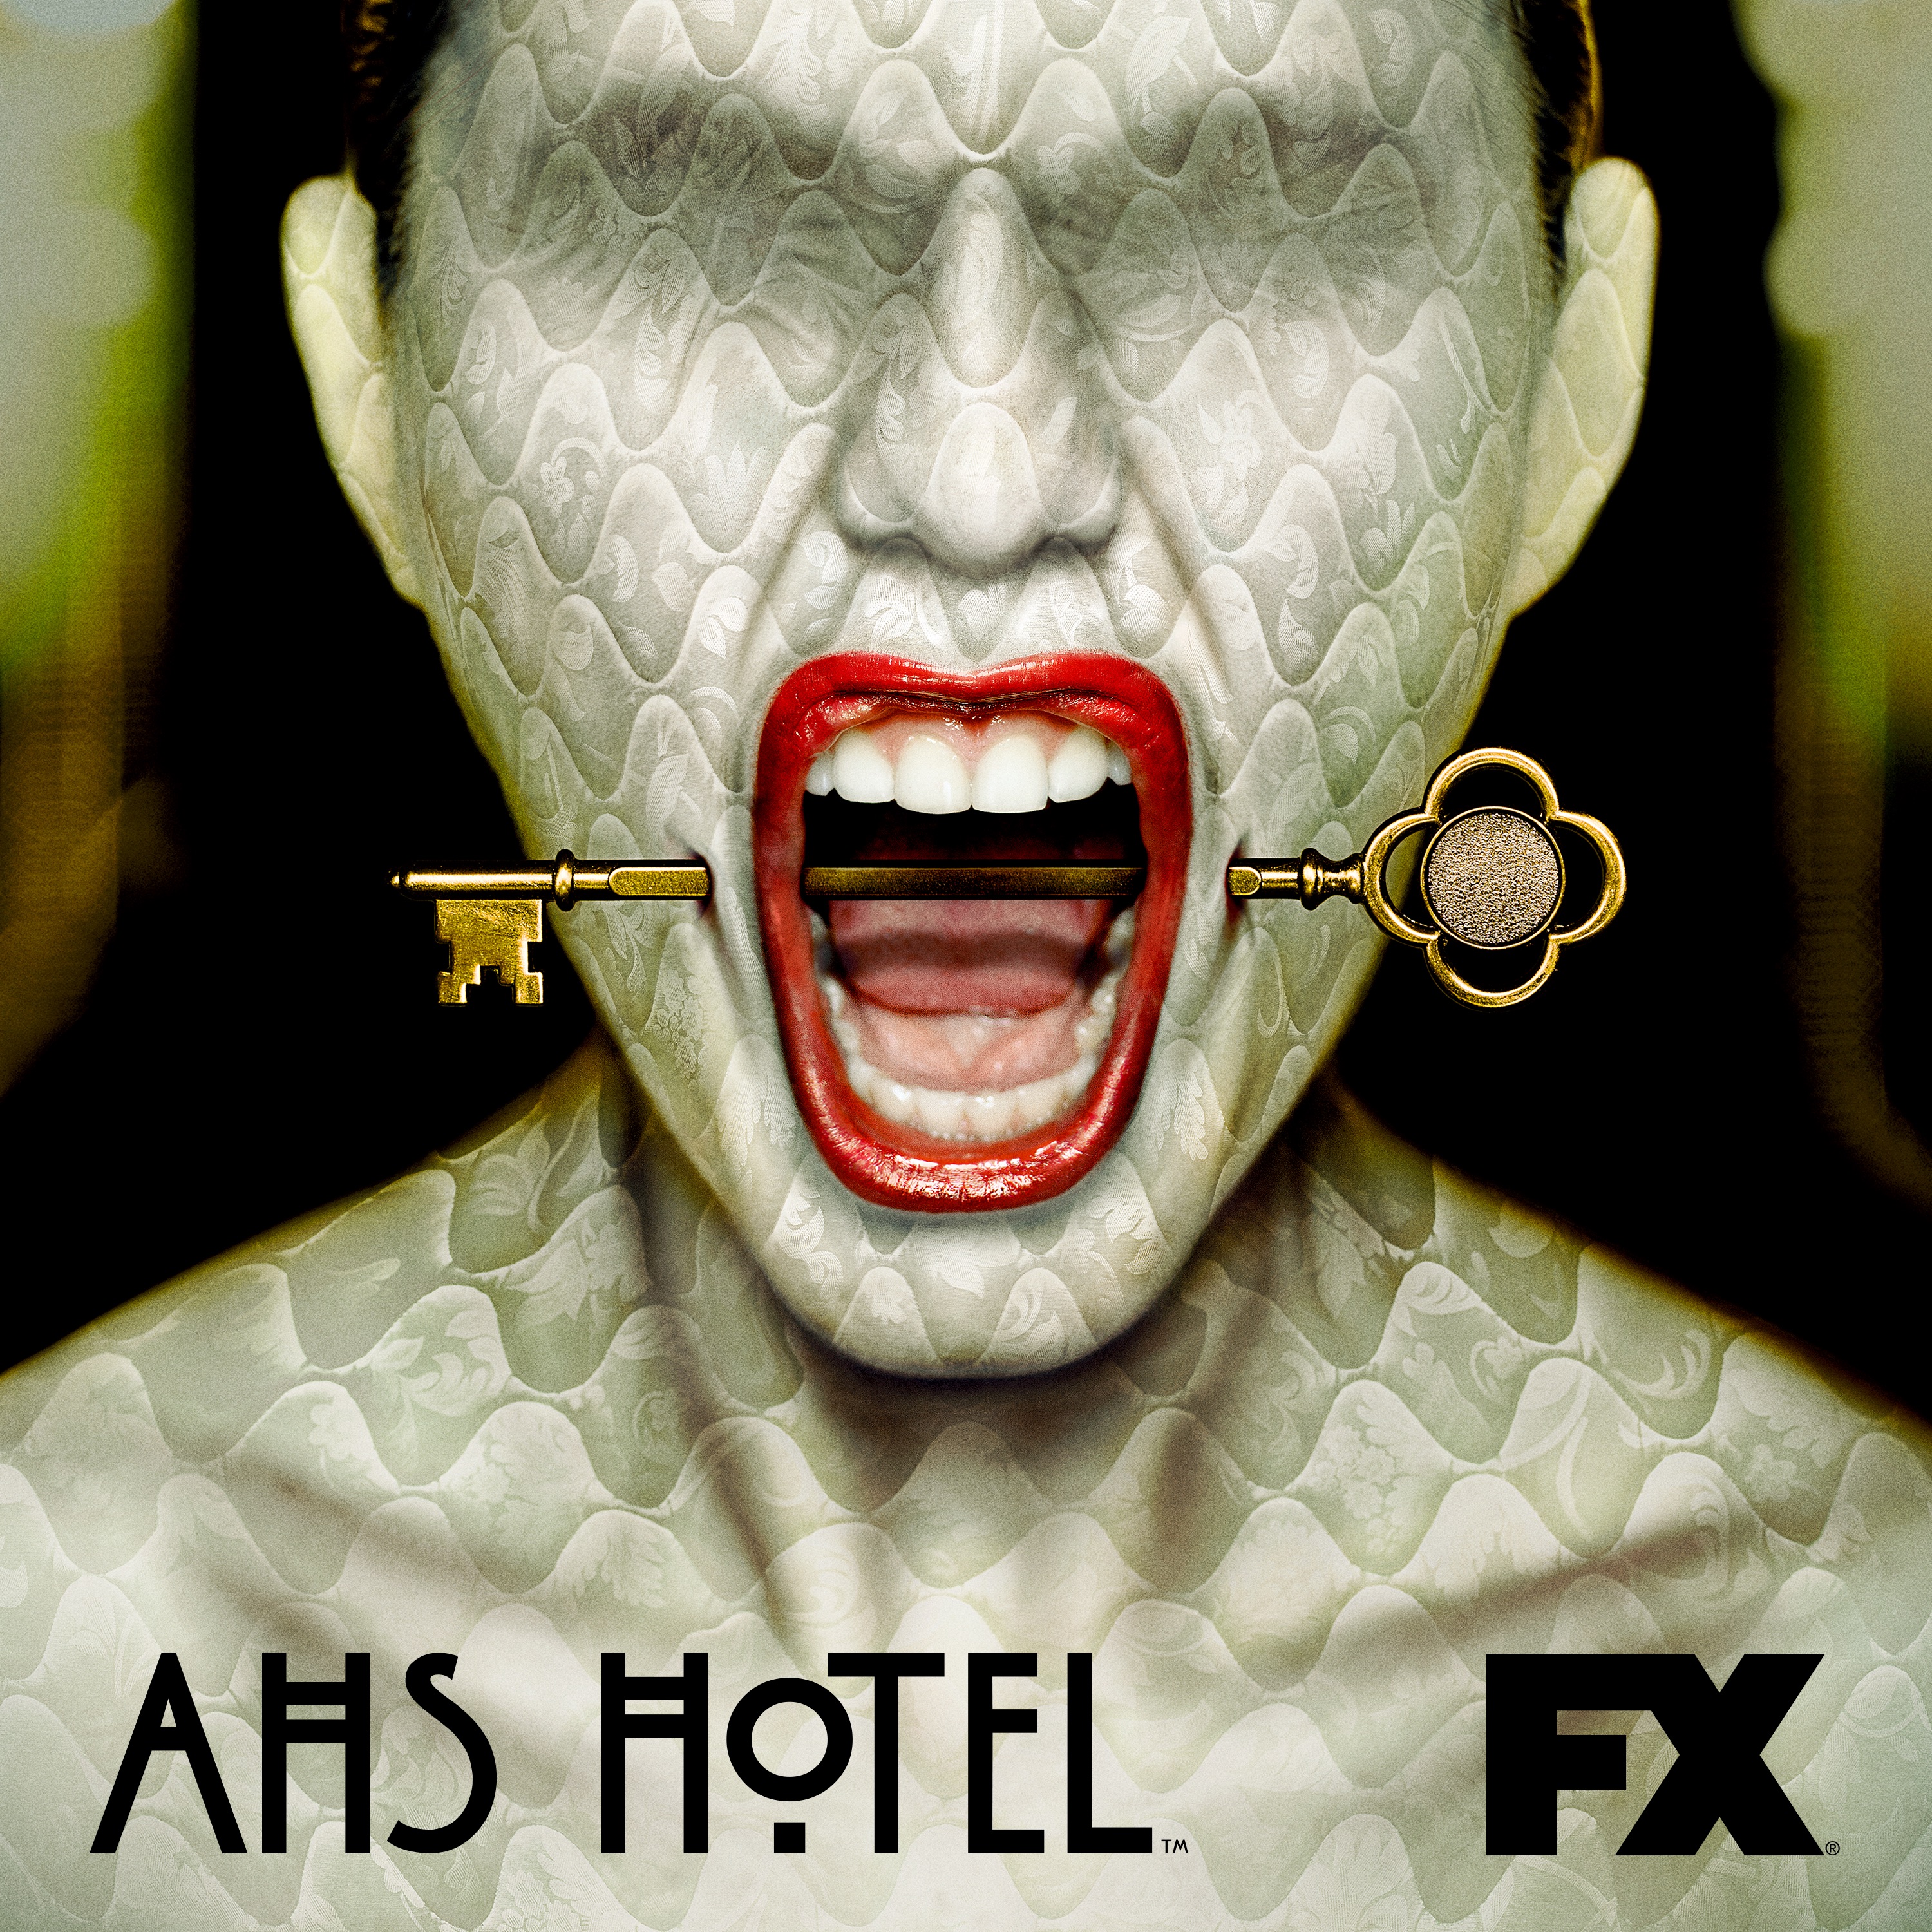 New American Horror Story Season 6 Poster is a Spider-Eyed 